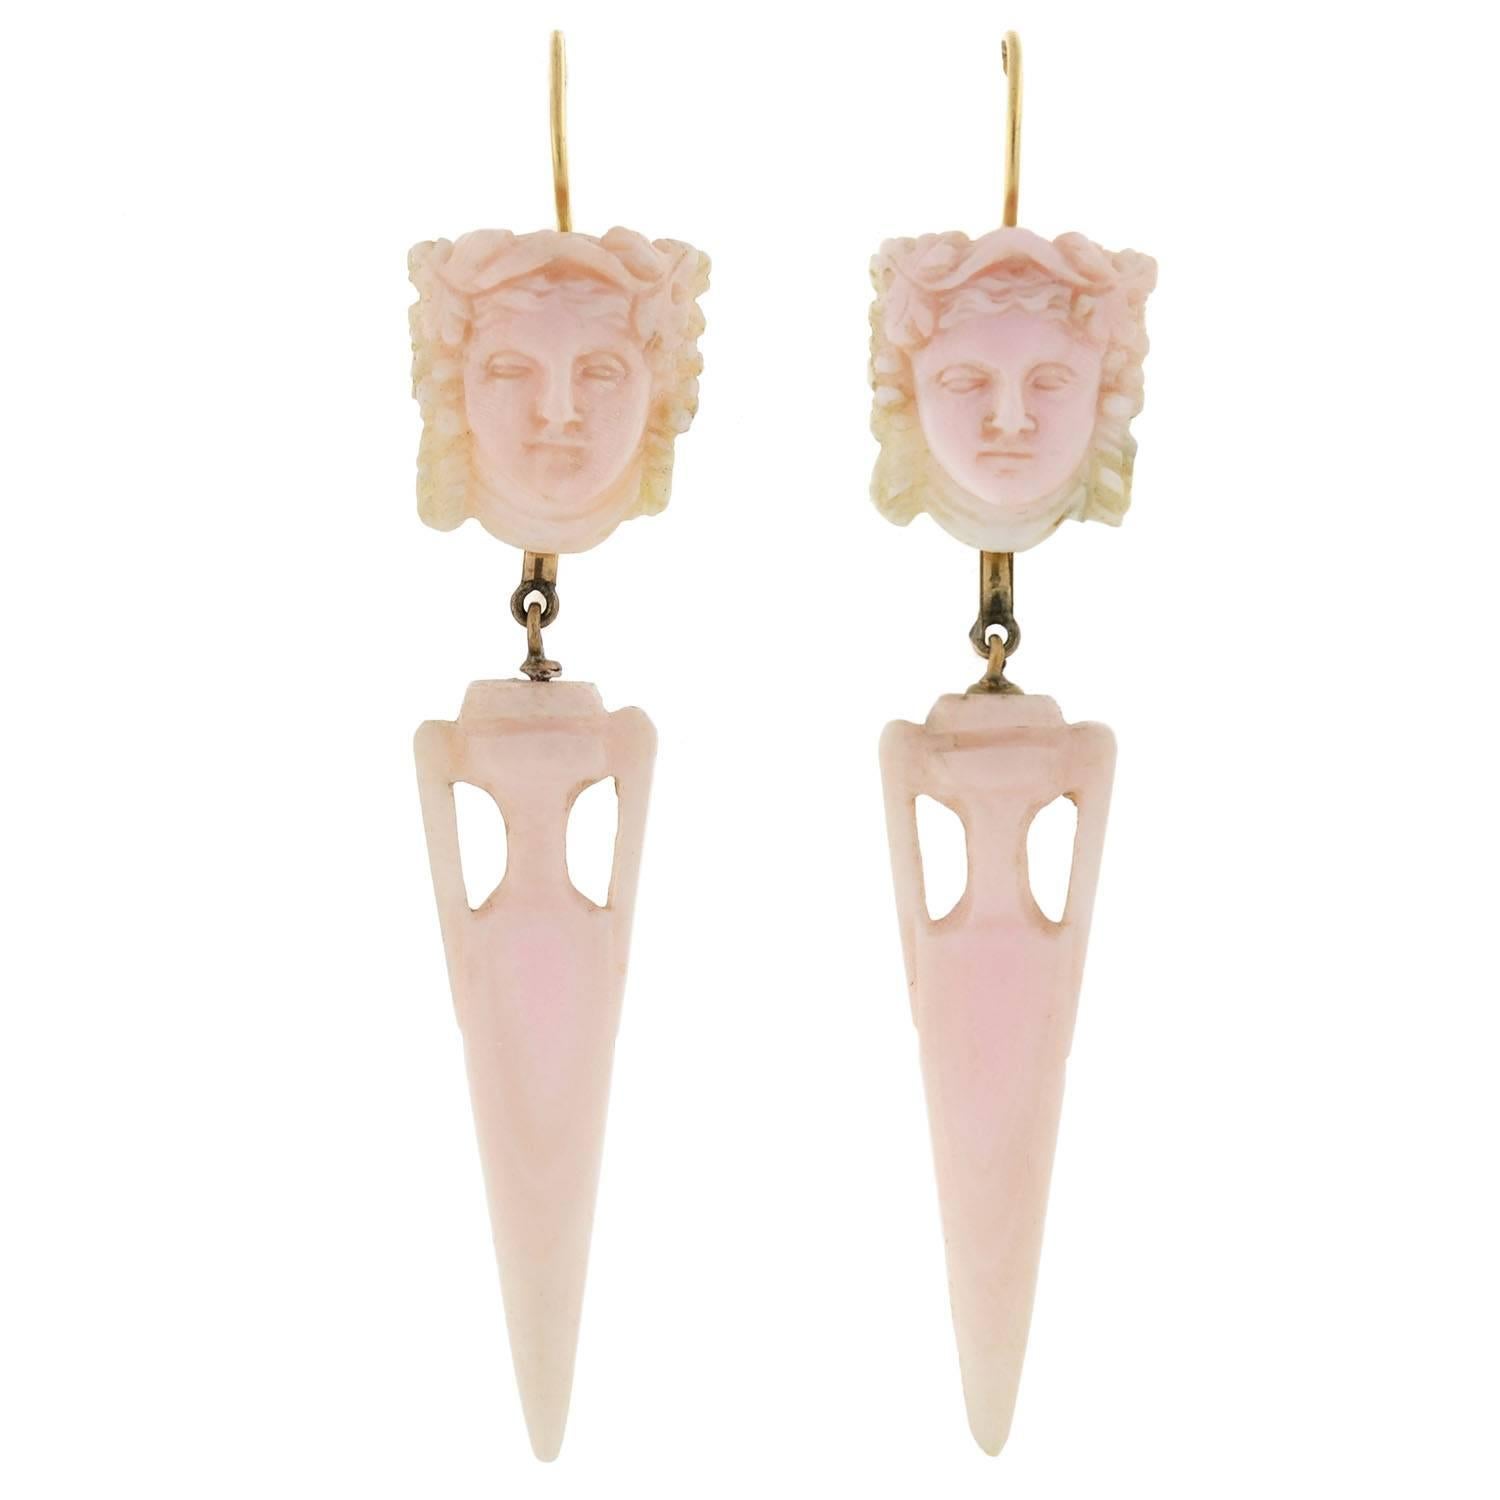 An absolutely fabulous hand carved angel skin coral set from the Victorian (ca1880) era! This fabulous set is comprised of a single pendant and a complimentary pair of earrings. The pendant hangs from a triangular, 14kt yellow gold frame that has a